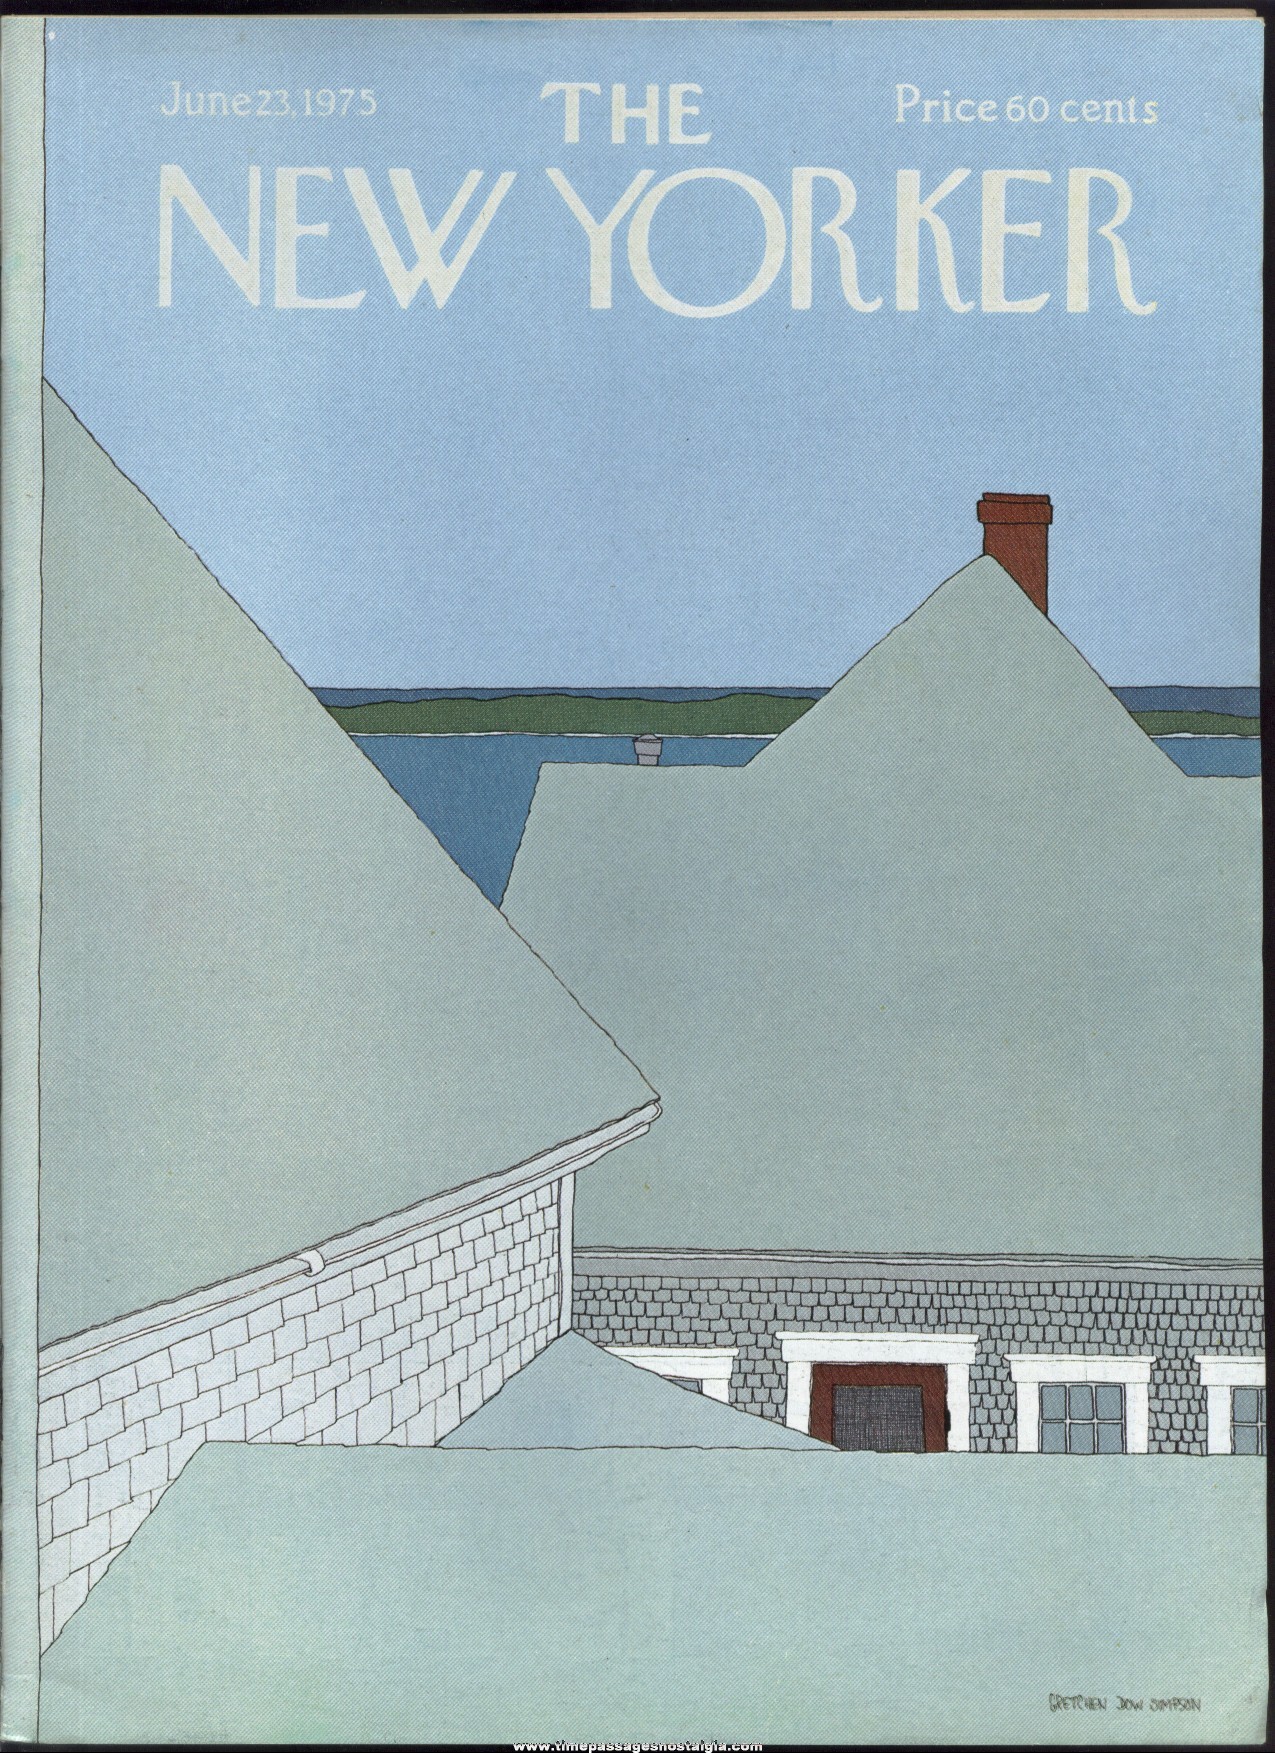 New Yorker Magazine - June 23, 1975 - Cover by Gretchen Dow Simpson